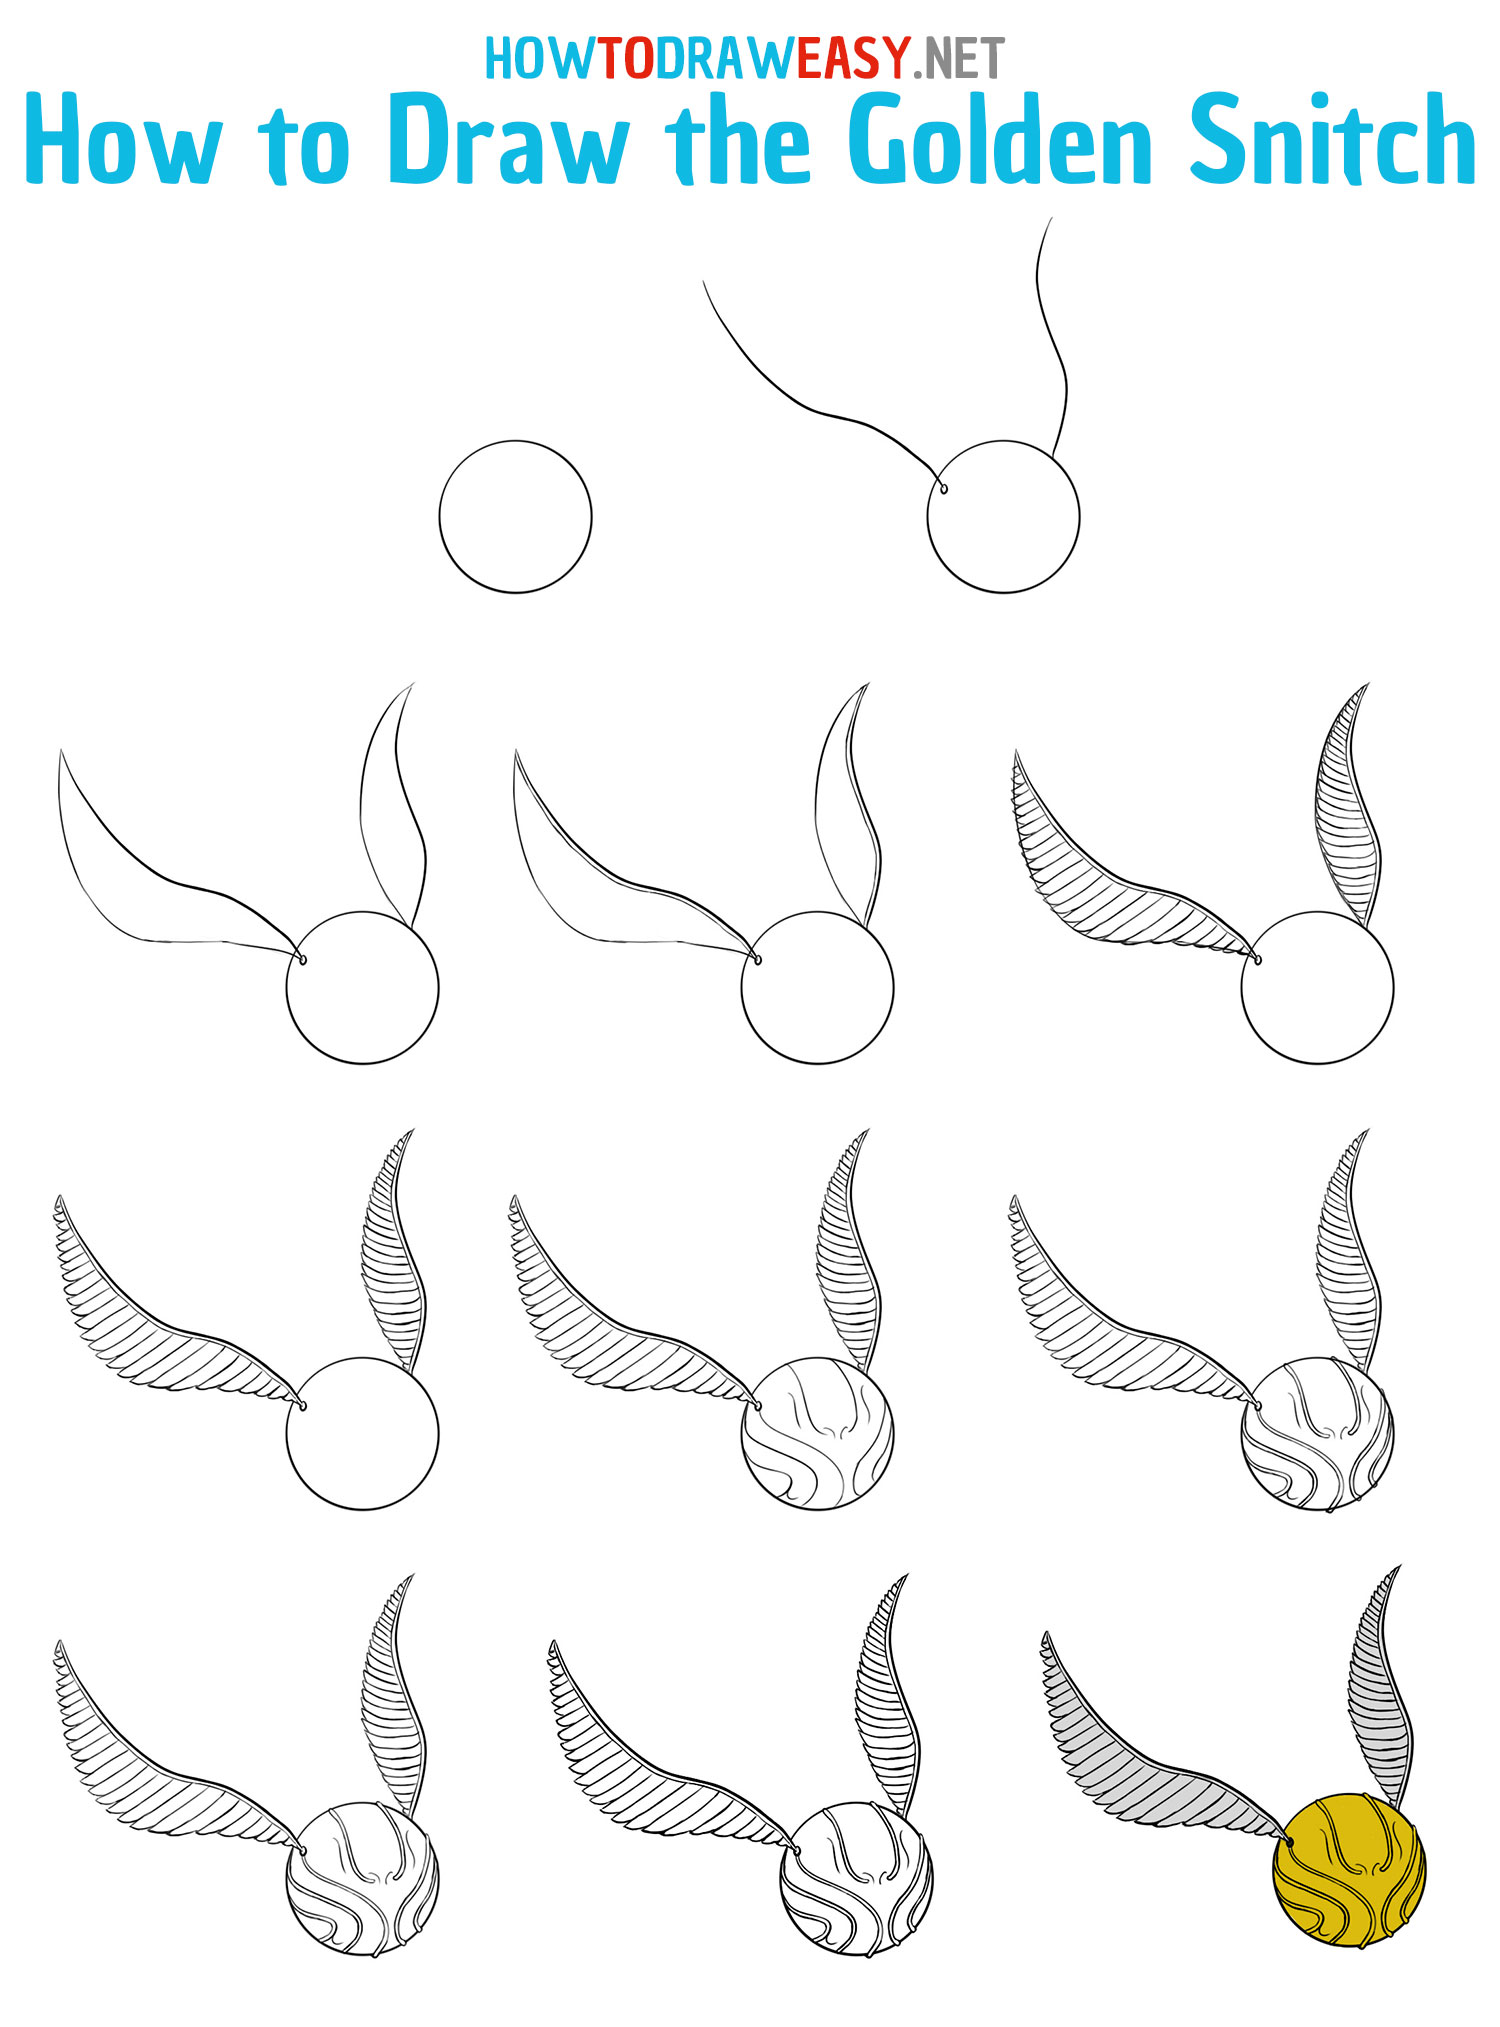 How to Draw the Golden Snitch Step by Step